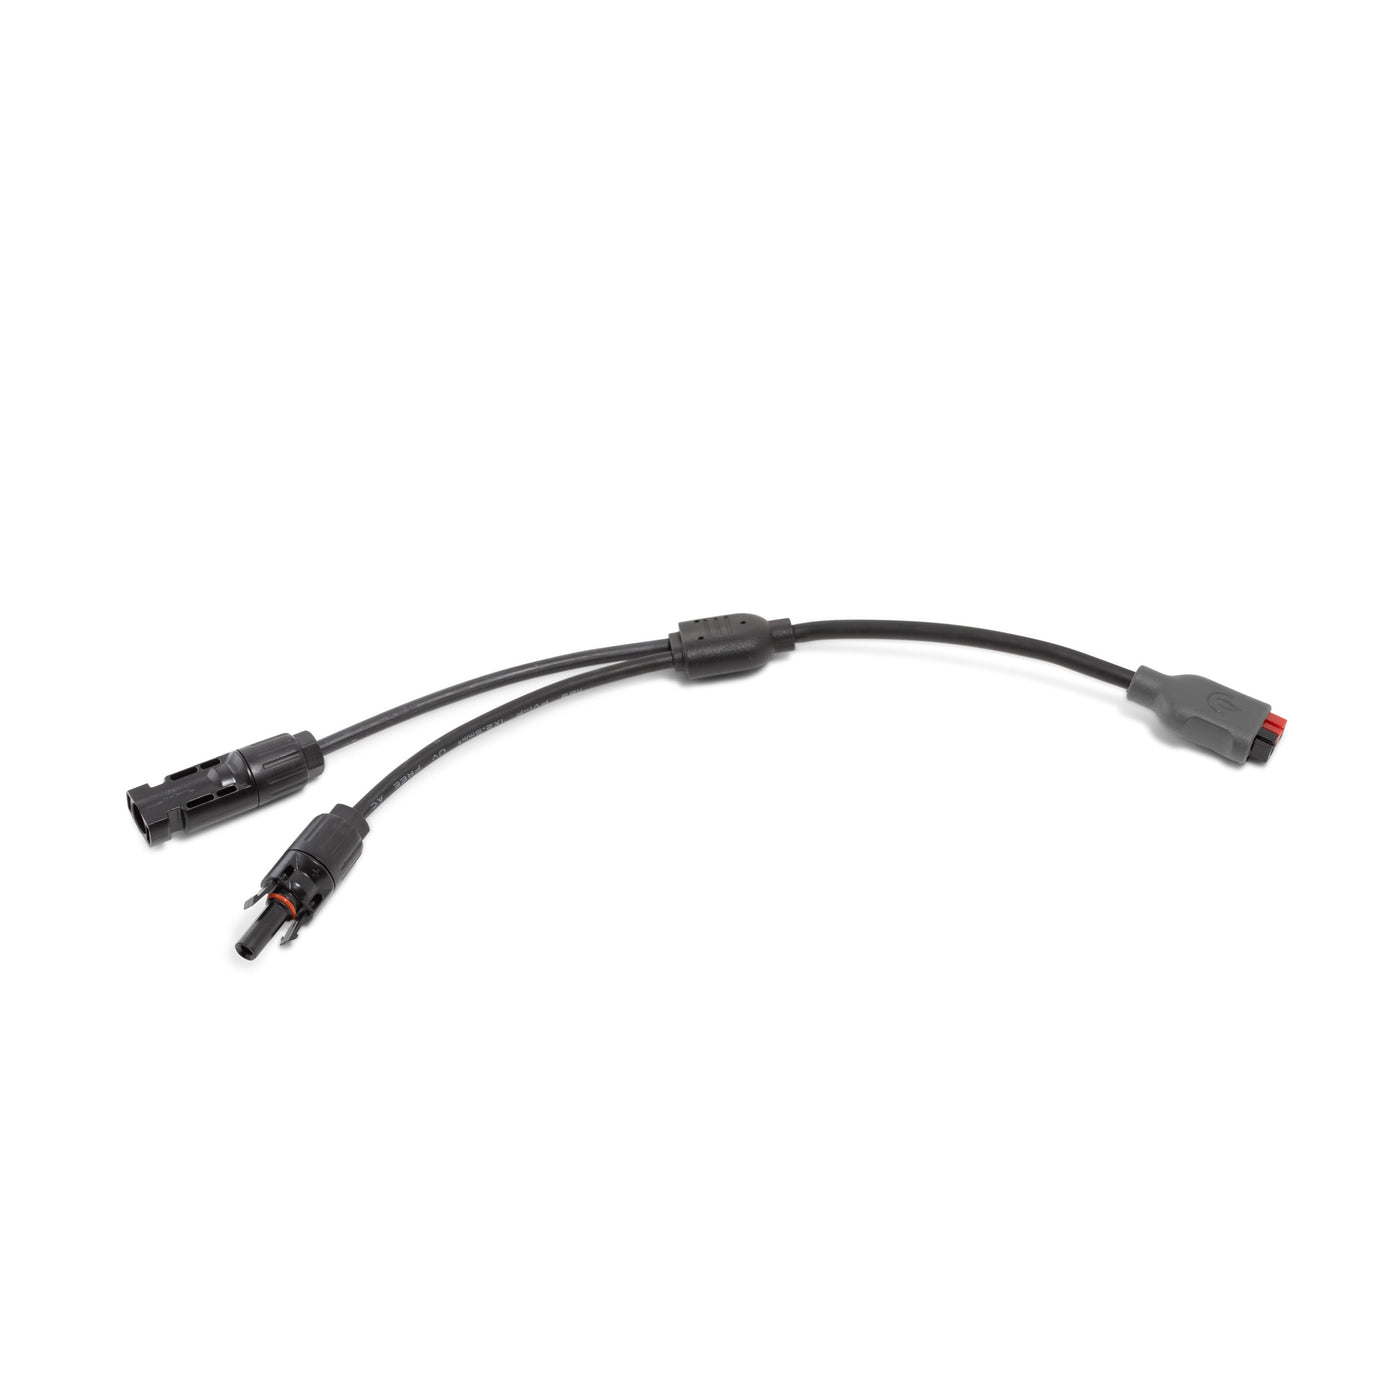 Solar MC4 to HPP Adapter Cable